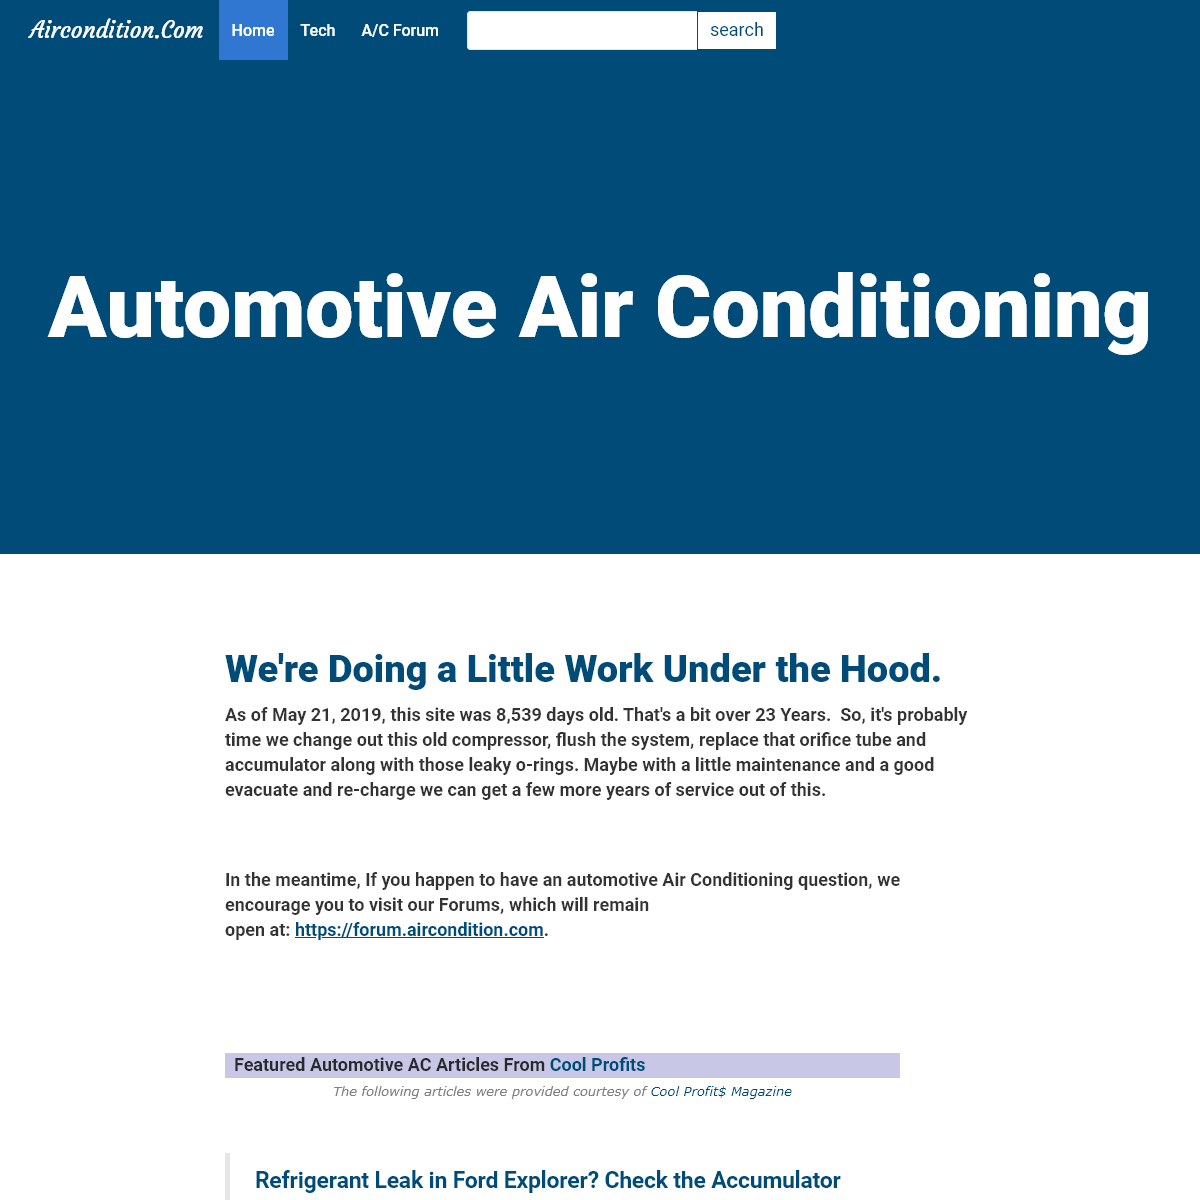 A complete backup of aircondition.com